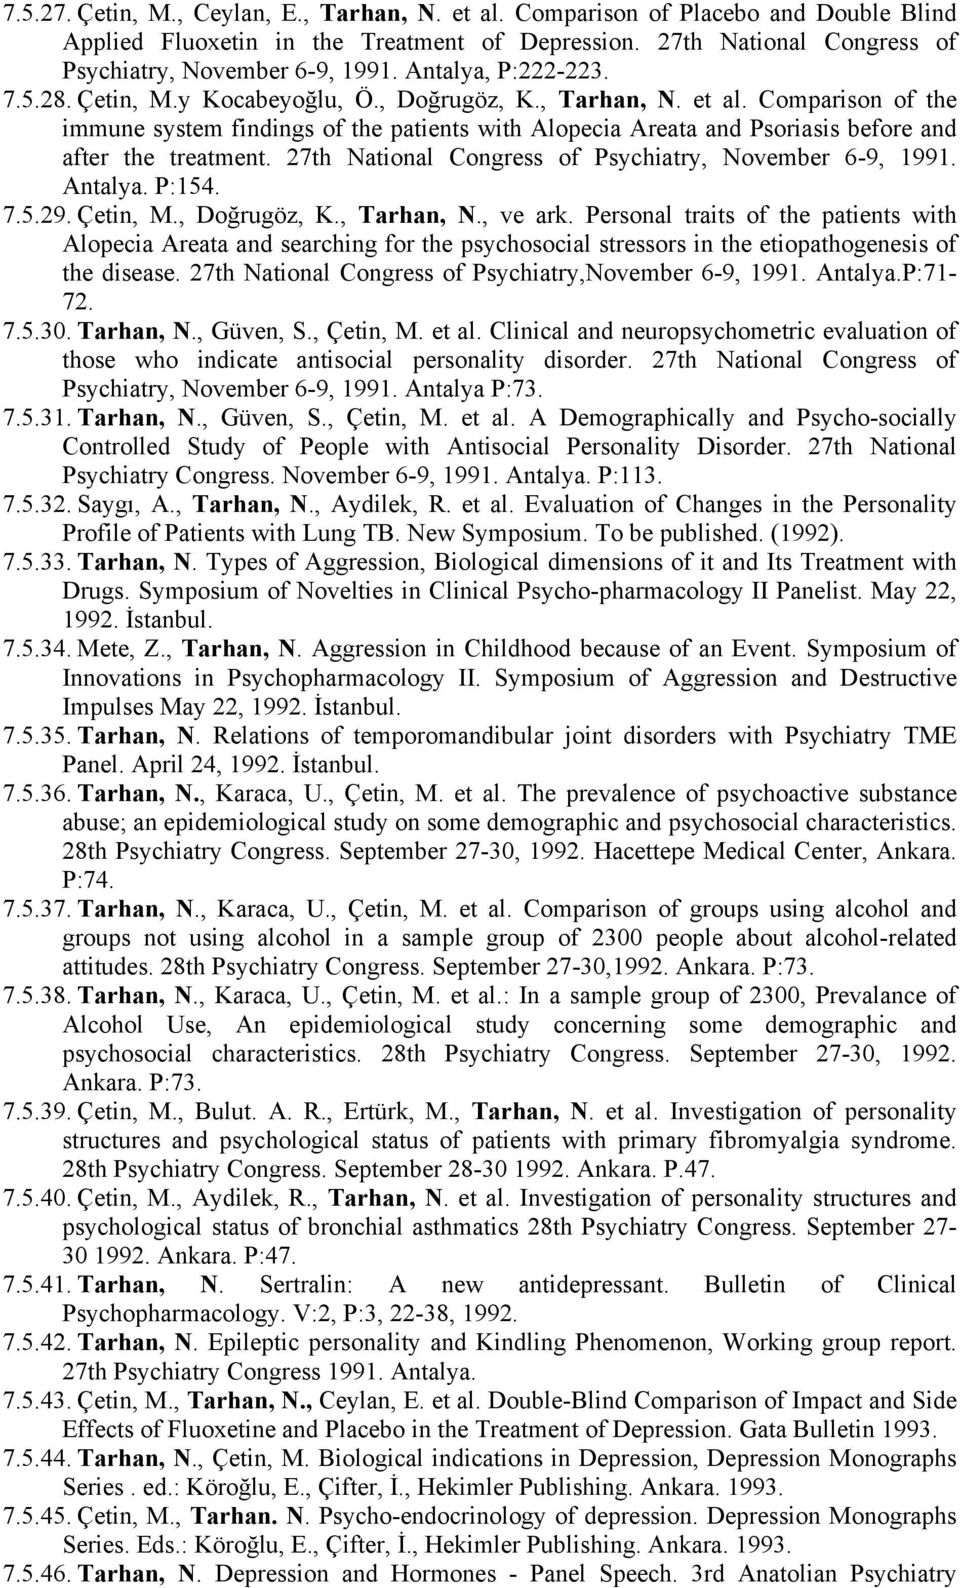 Comparison of the immune system findings of the patients with Alopecia Areata and Psoriasis before and after the treatment. 27th National Congress of Psychiatry, November 6-9, 1991. Antalya. P:154. 7.